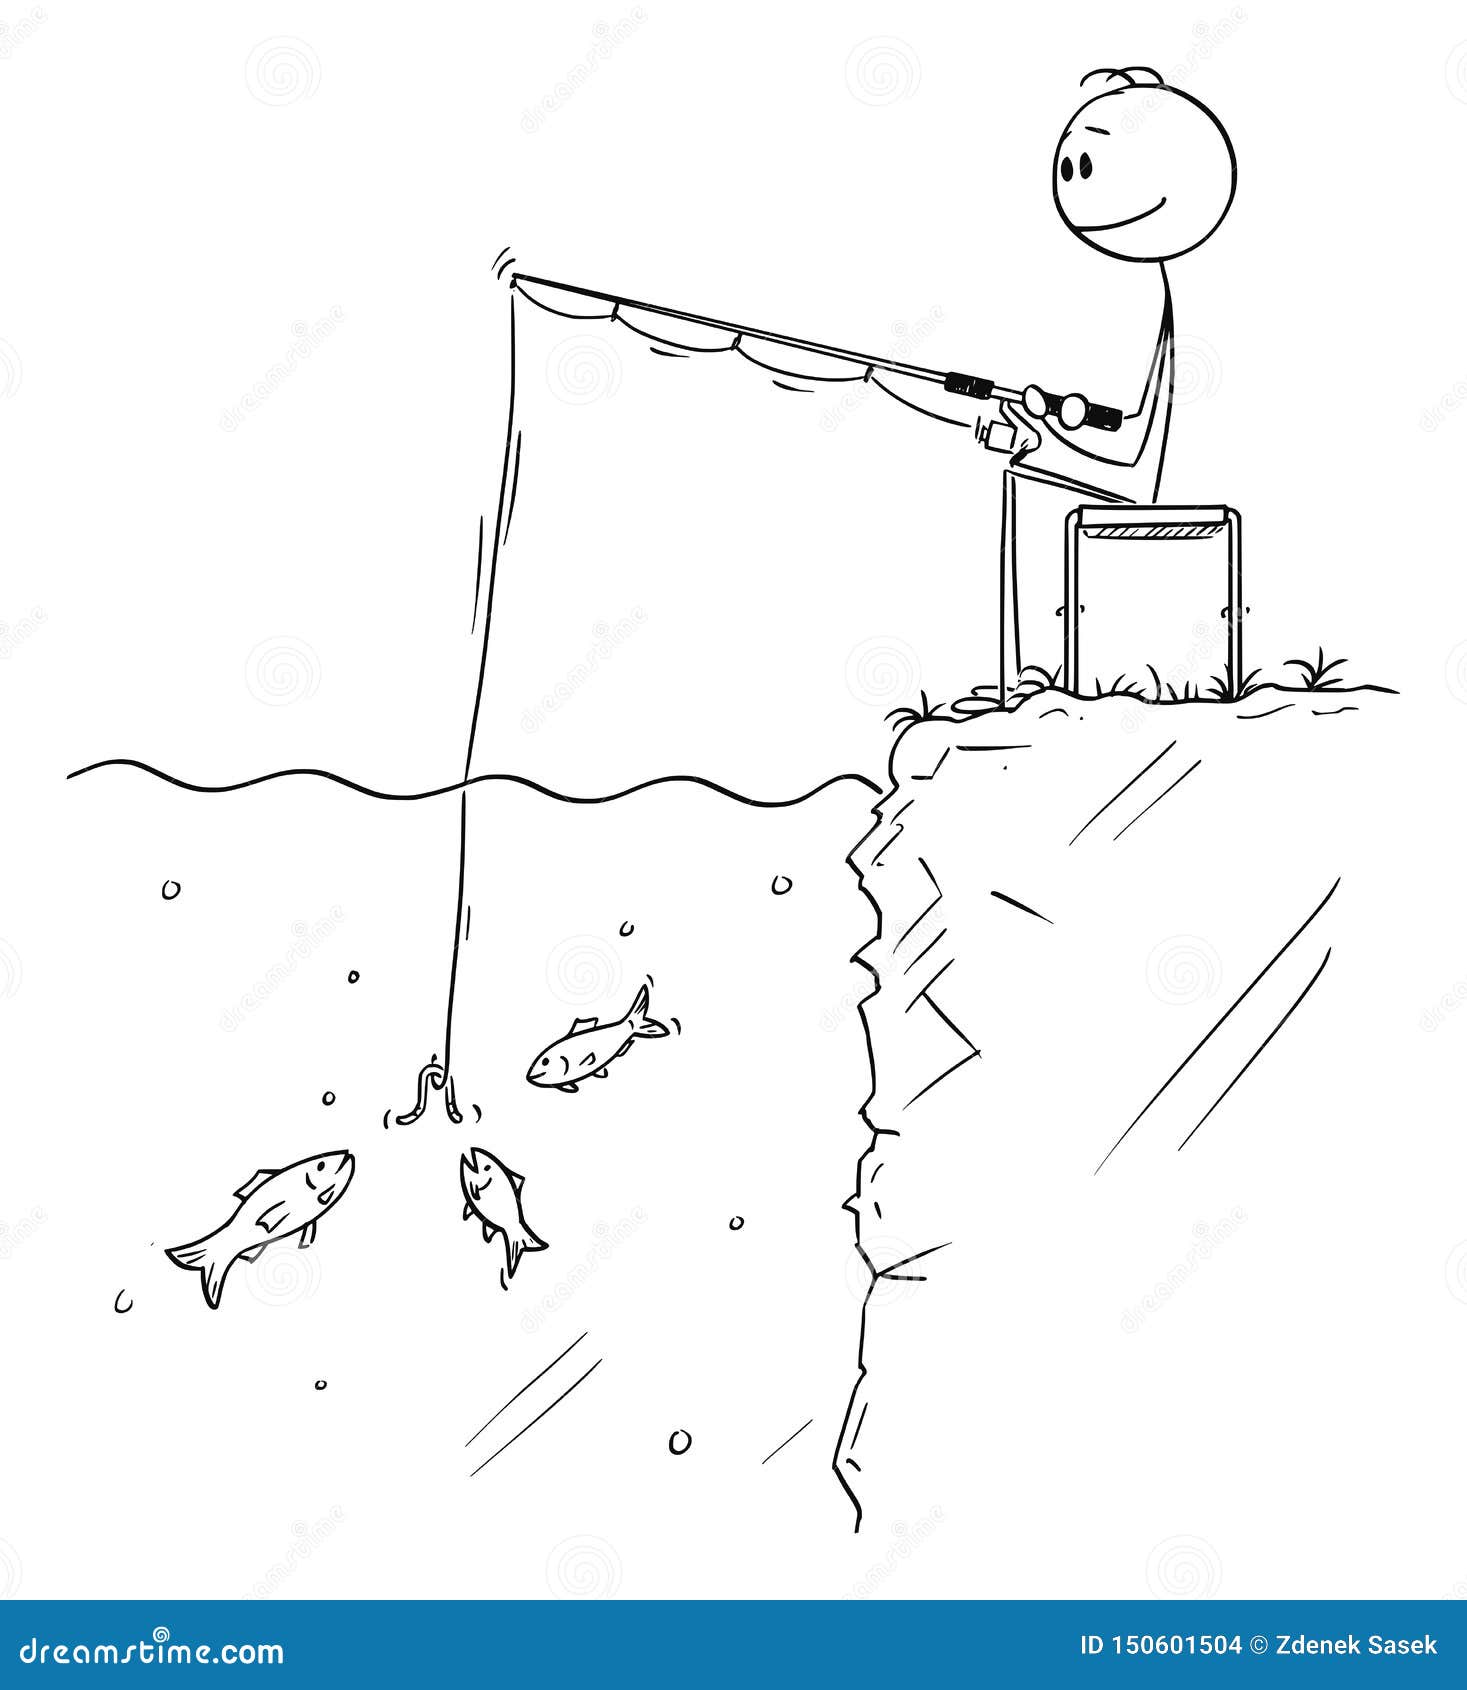  cartoon of man or fisherman sitting and angling or fishing while several small fish are looking at the bait